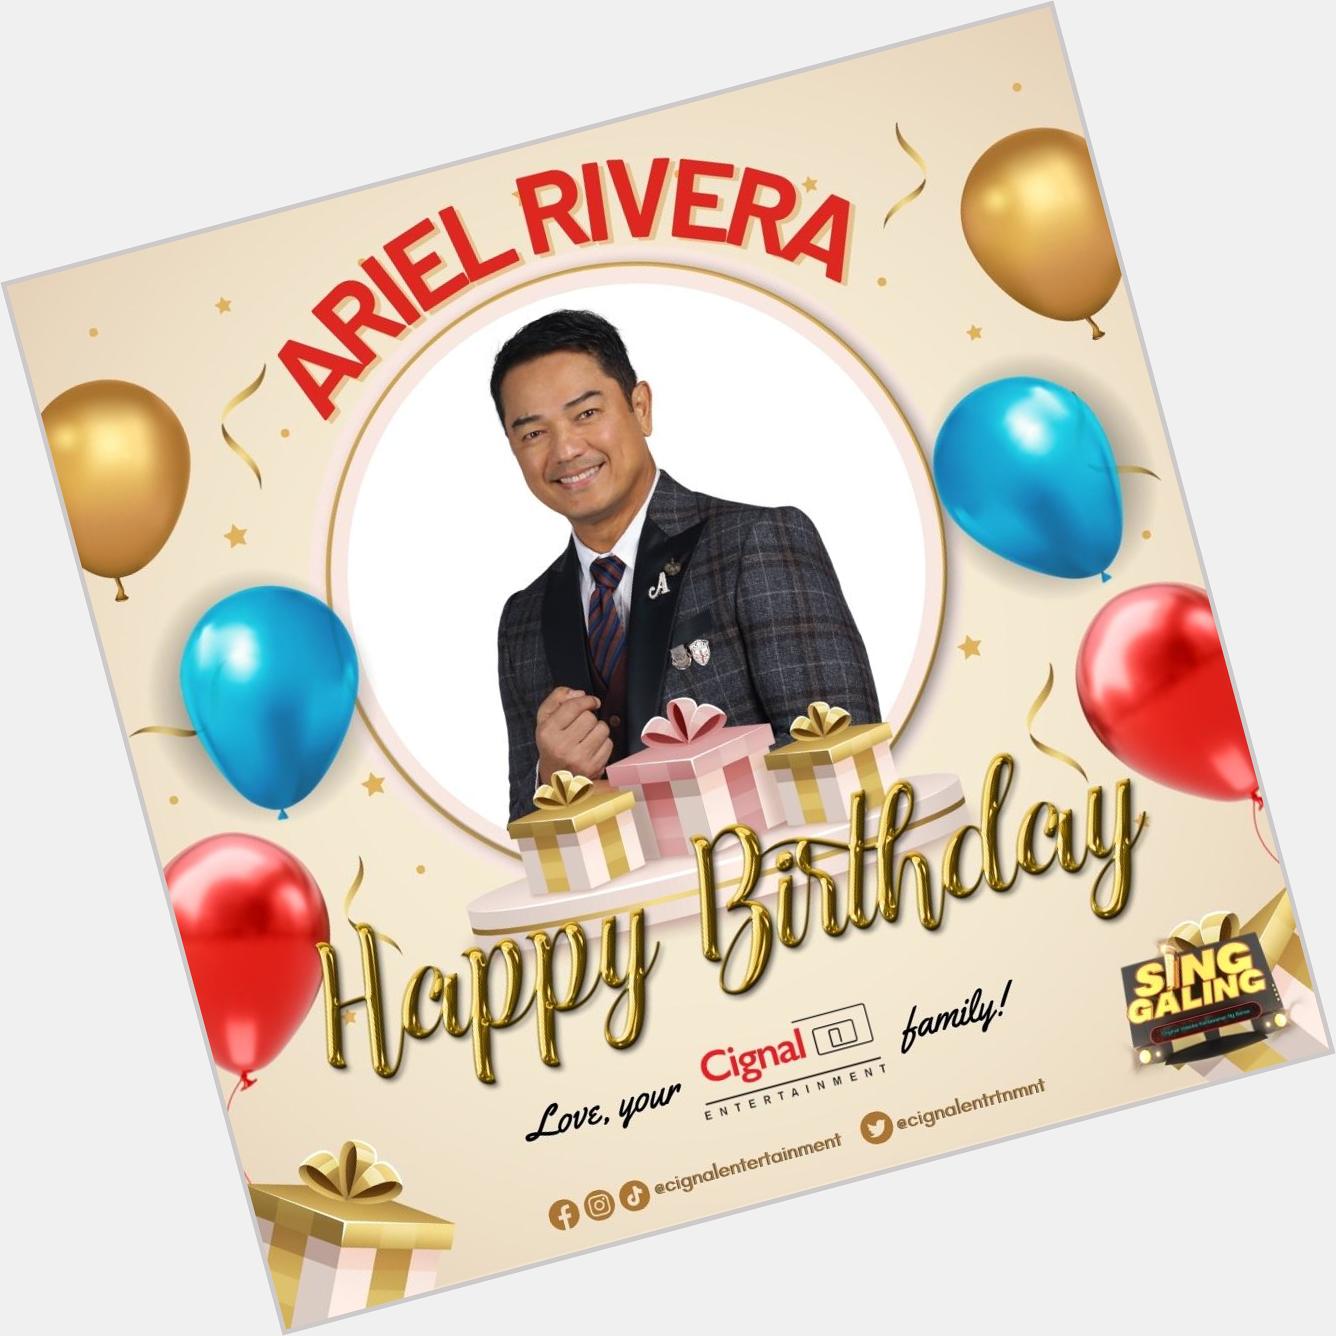 Happy birthday, Jukeboss Ariel Rivera! Your Cignal Entertainment family wishes you all the best!   